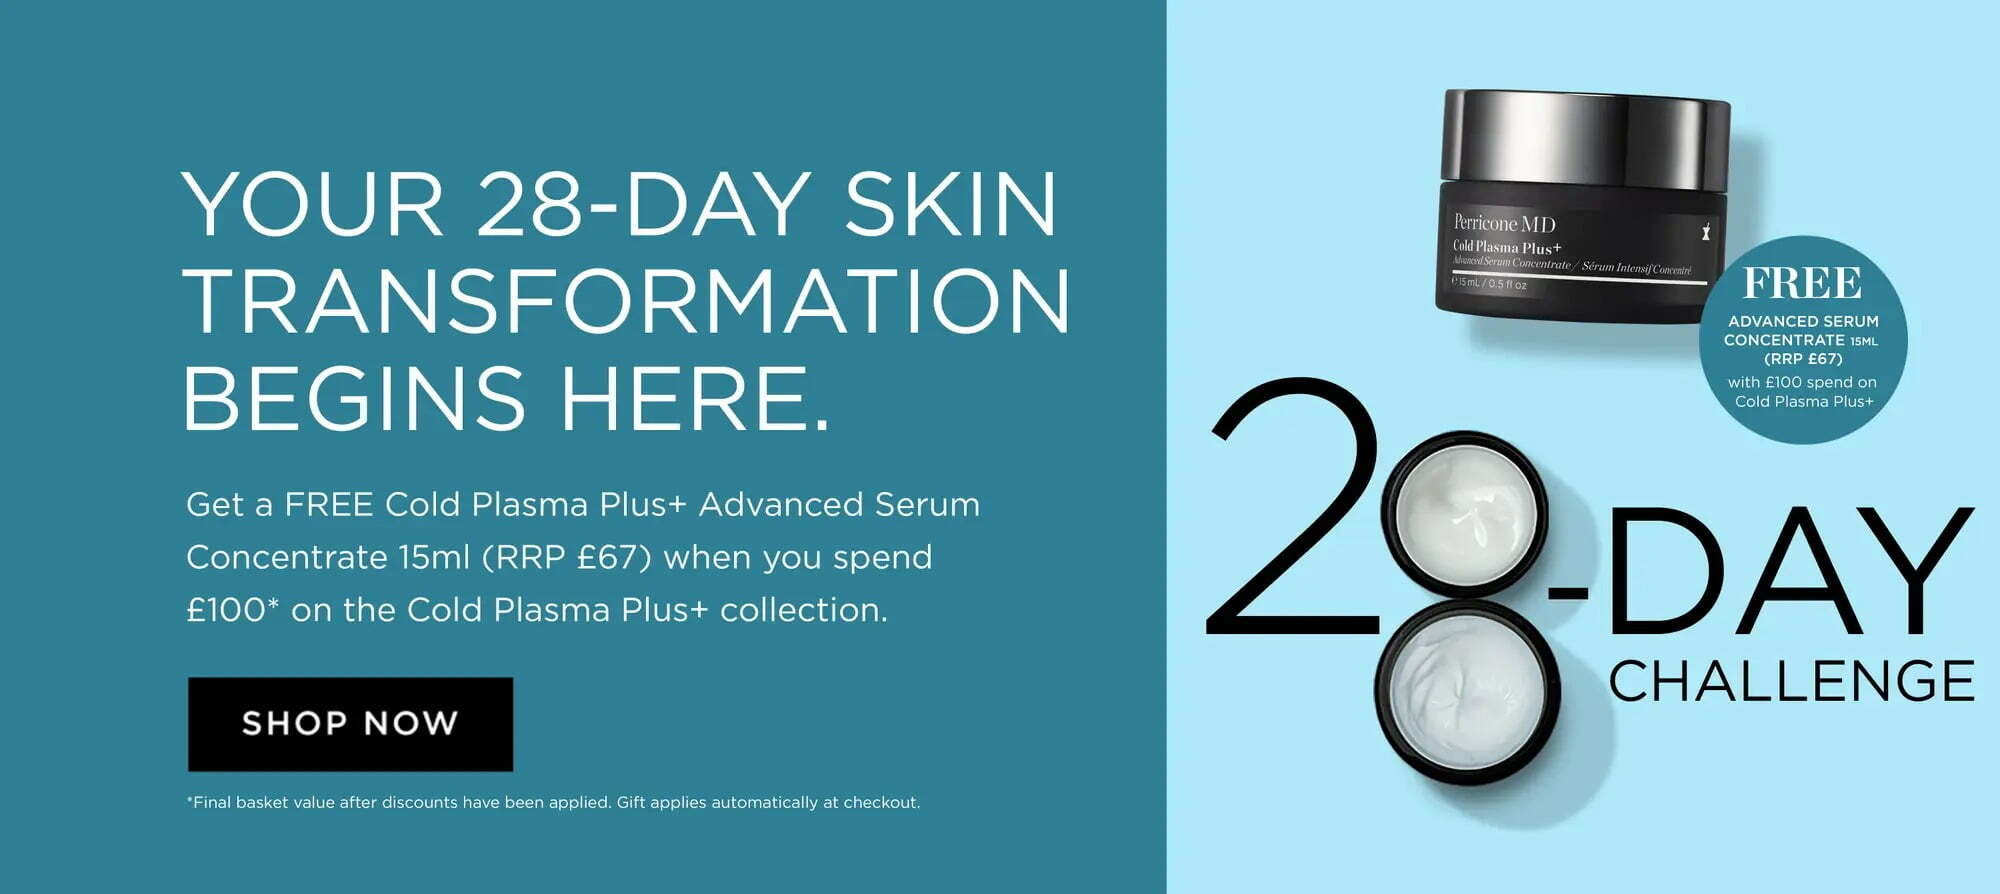 Spend £100 on Cold Plasma Plus and get a 15ml CPP Advanced Serum Concentrate worth £75 for free